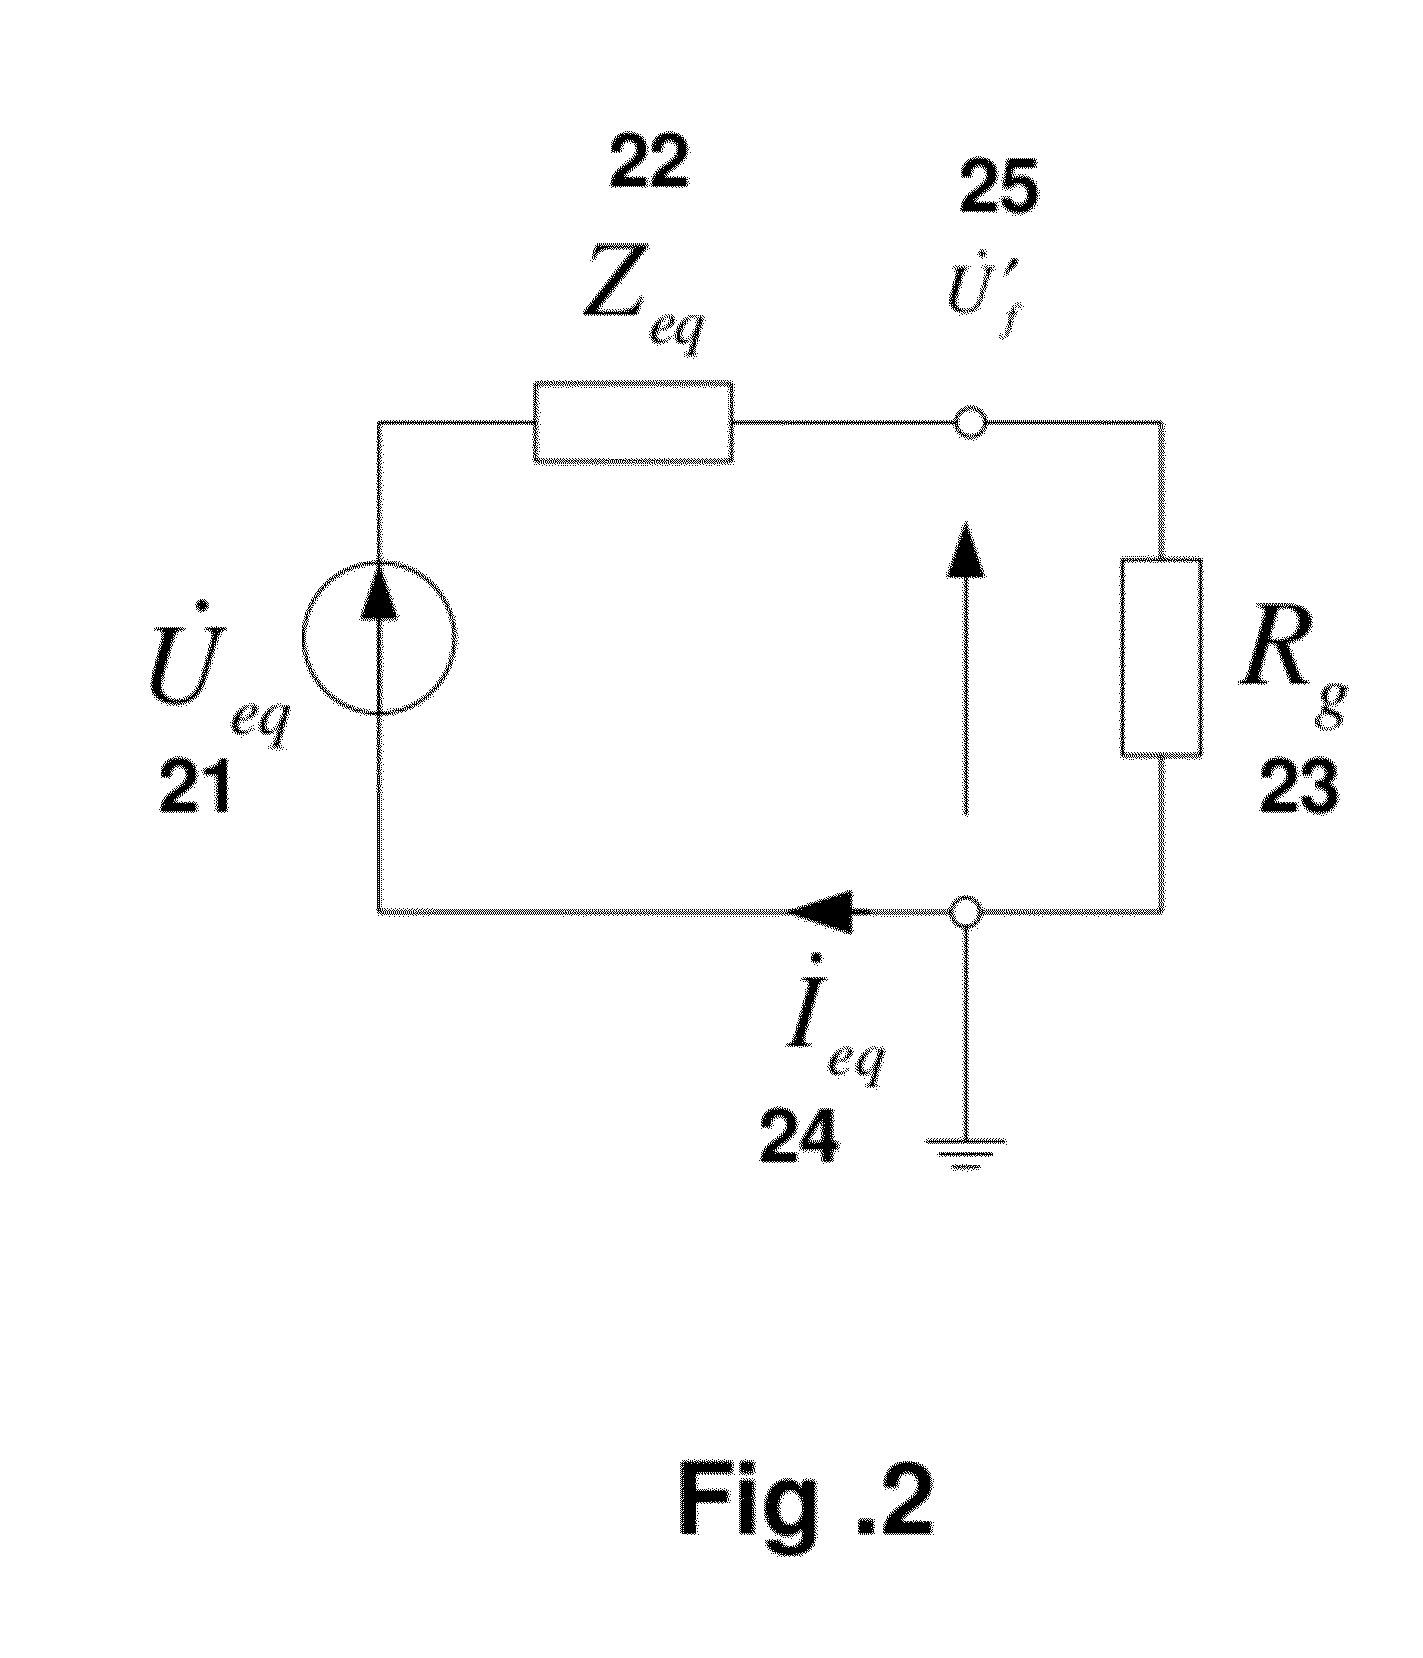 Method for Identifying Type of Fault on Power Line